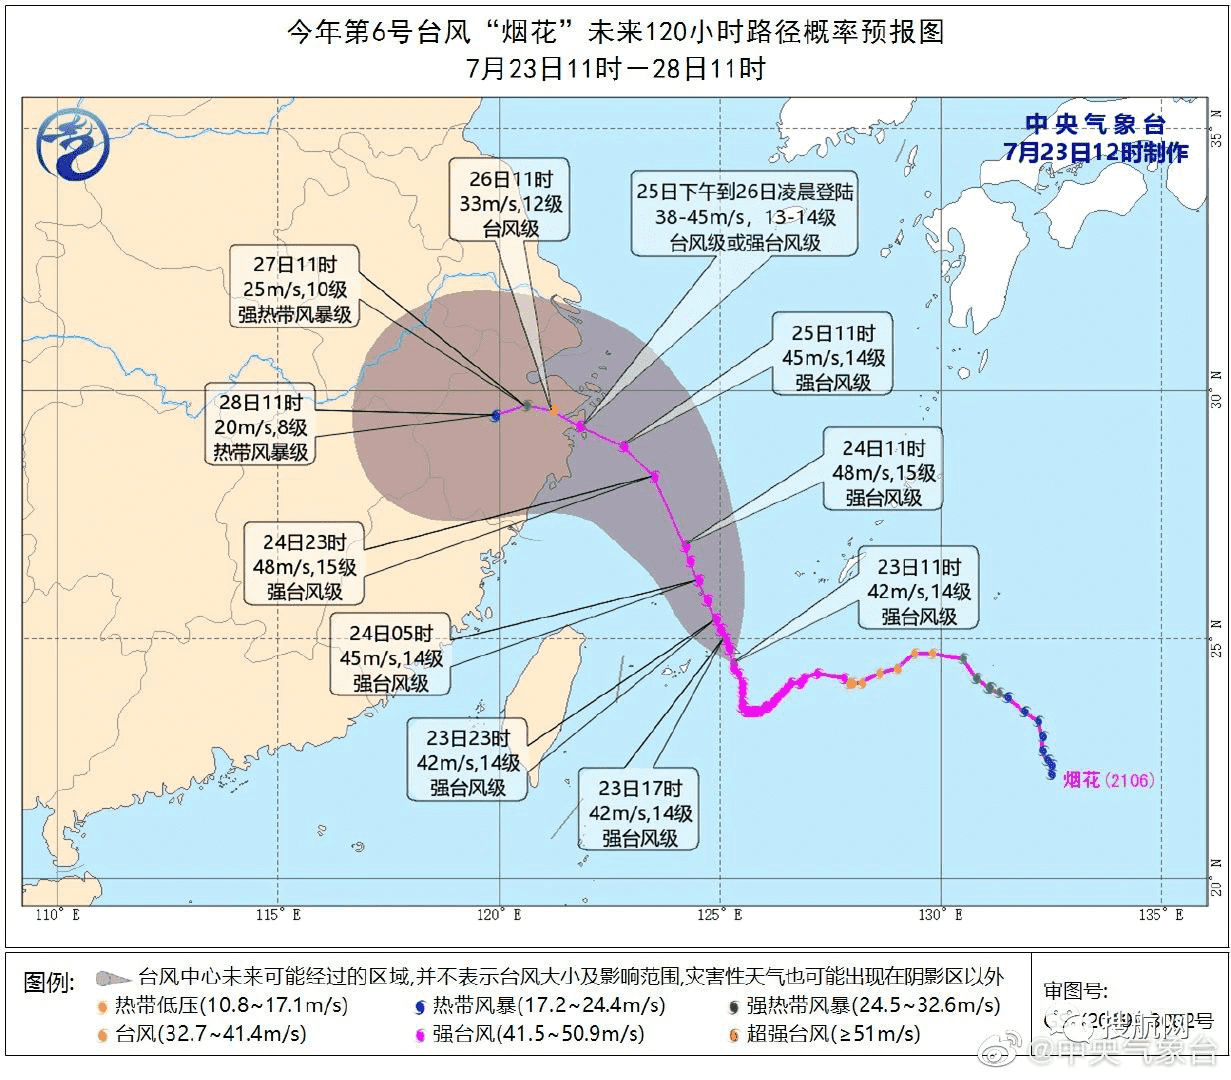 3. Typhoon “fireworks” landing warning! Please pay attention to the shipment in East China!